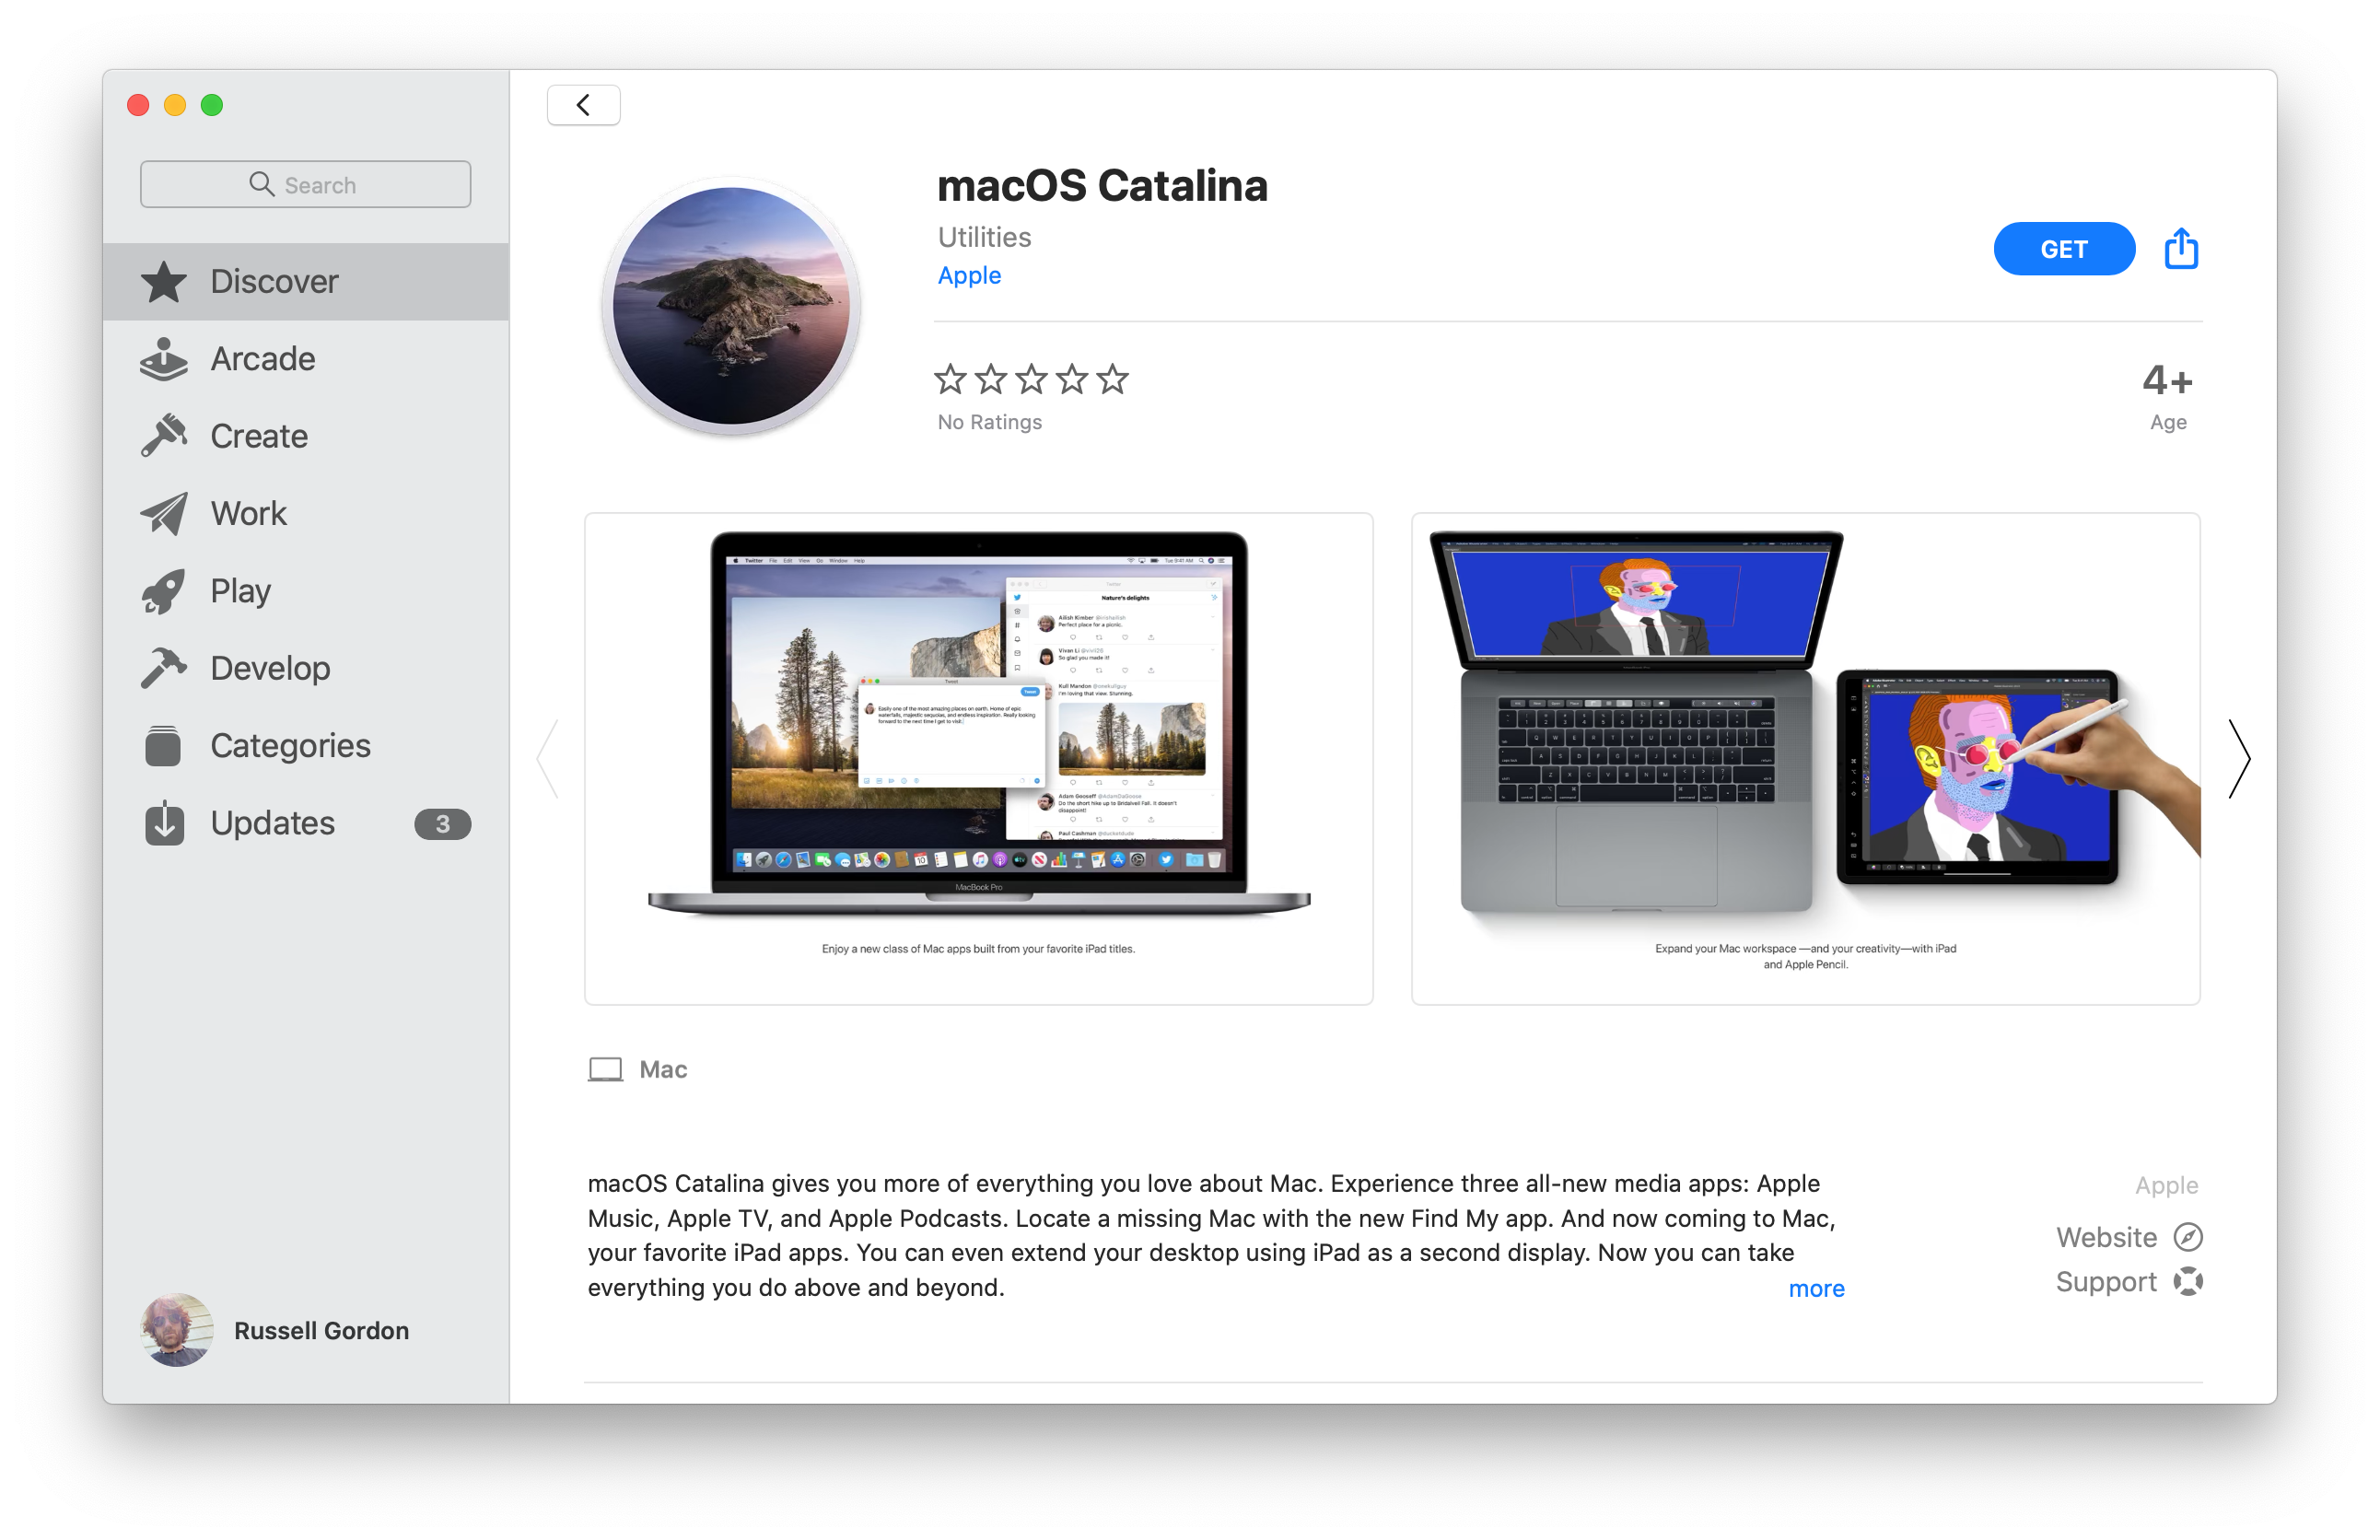 macOS Catalina listing page on the Mac App Store.